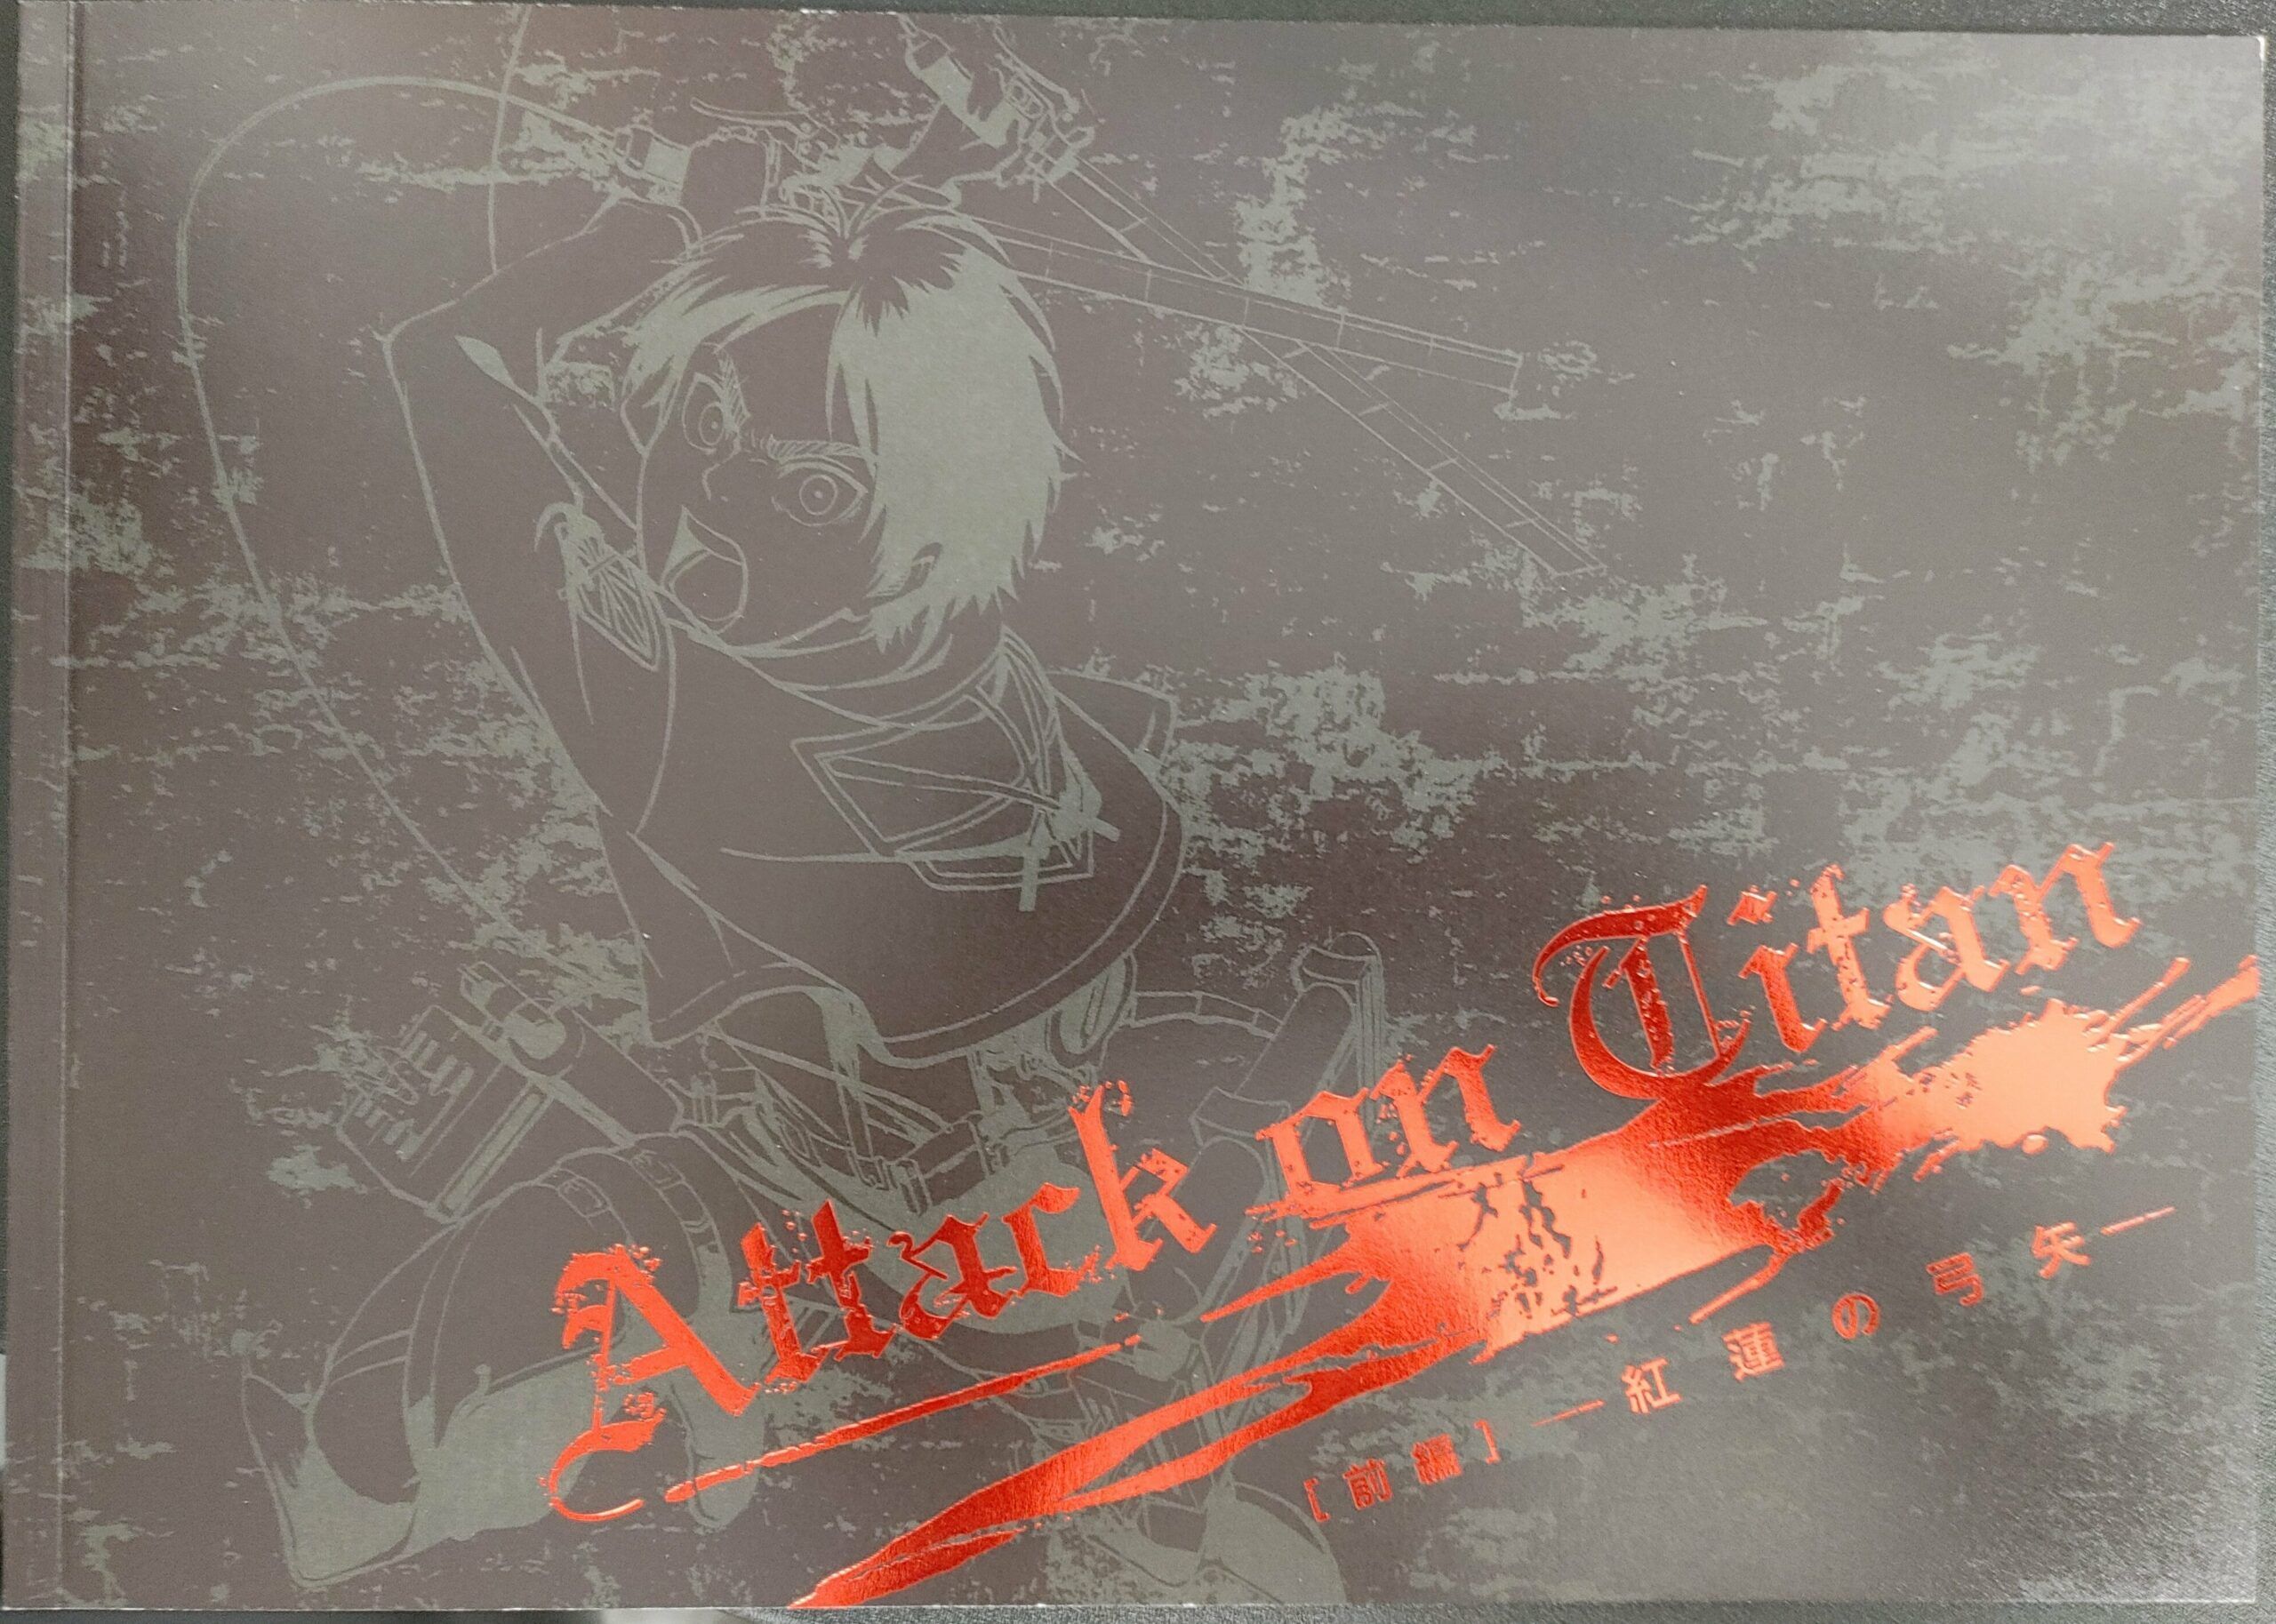 (BOOK) ATTACK ON TITAN TV ANIMATION PART 1 PAMPHLET